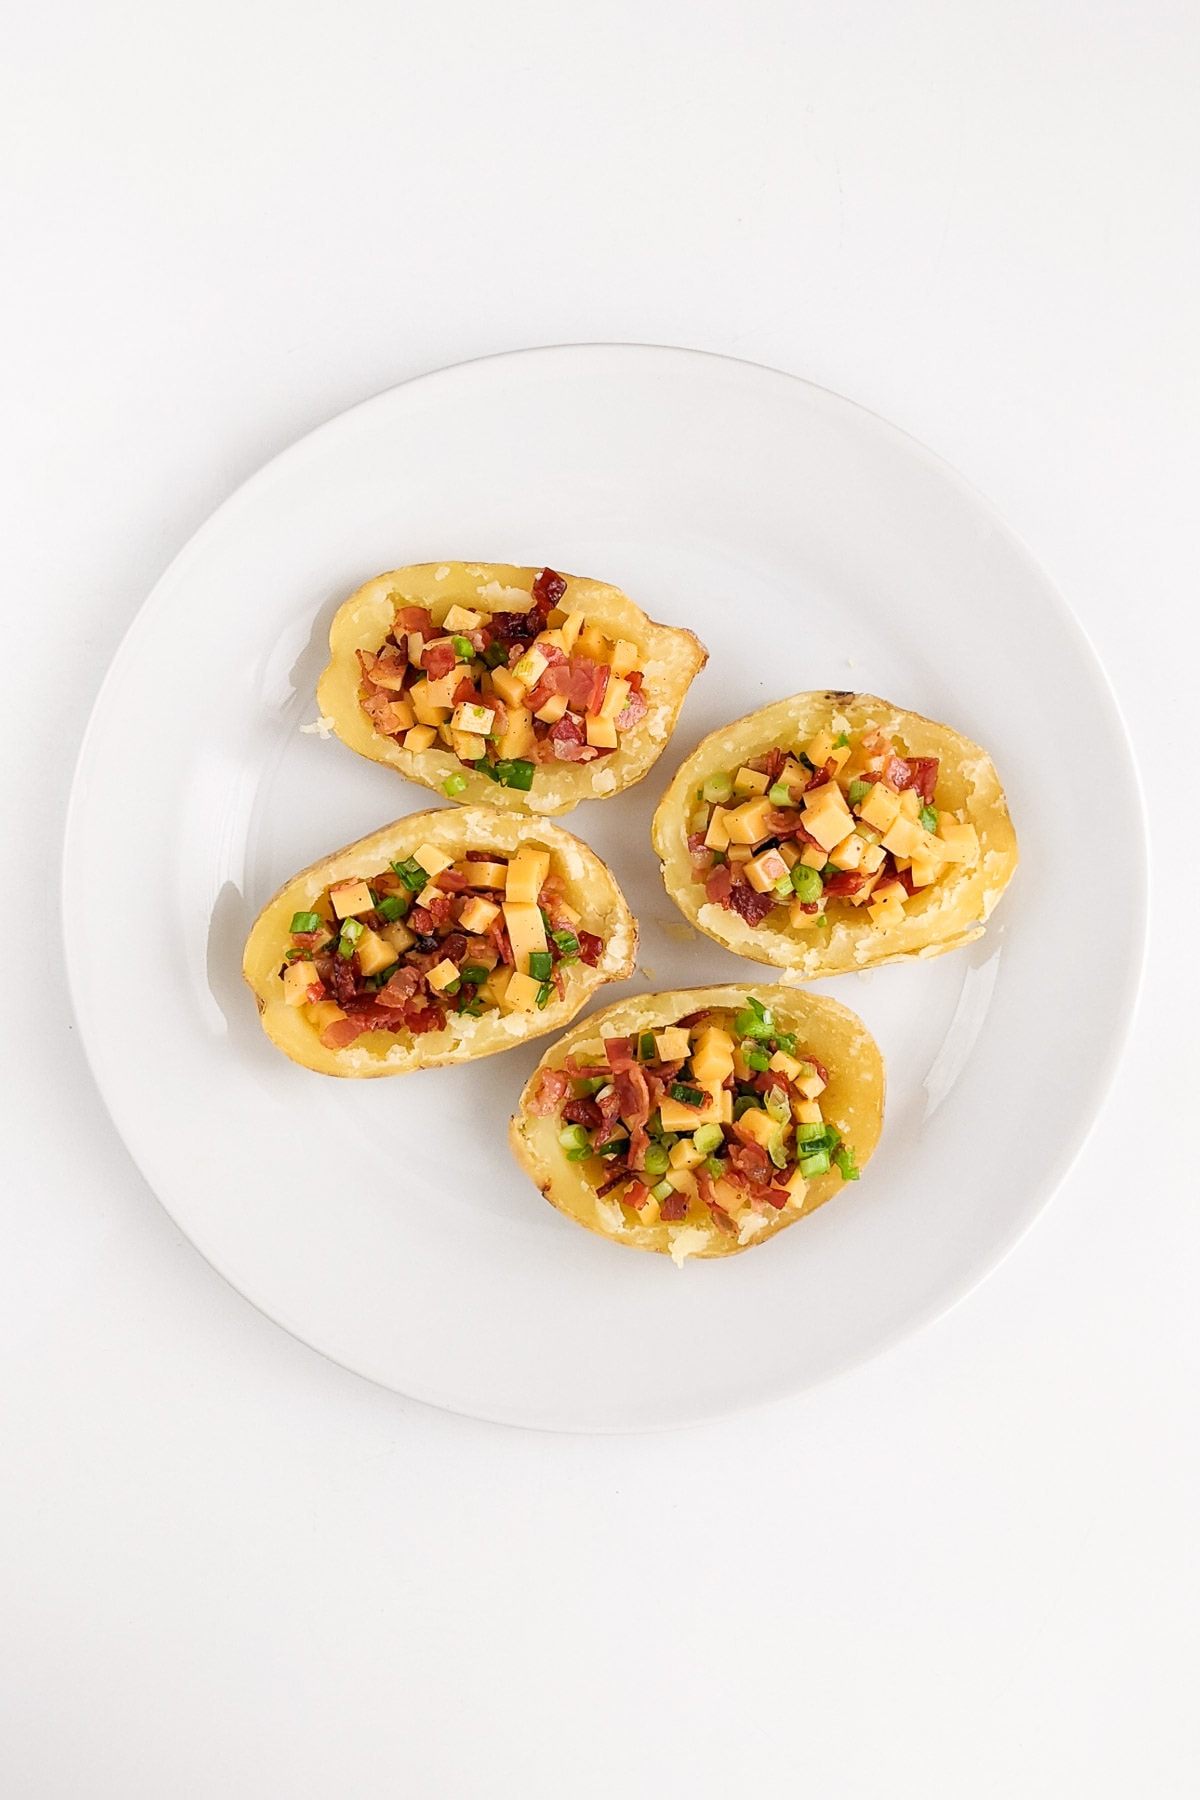 Four potato skins filled with bacon, onions and cheddar cheese.